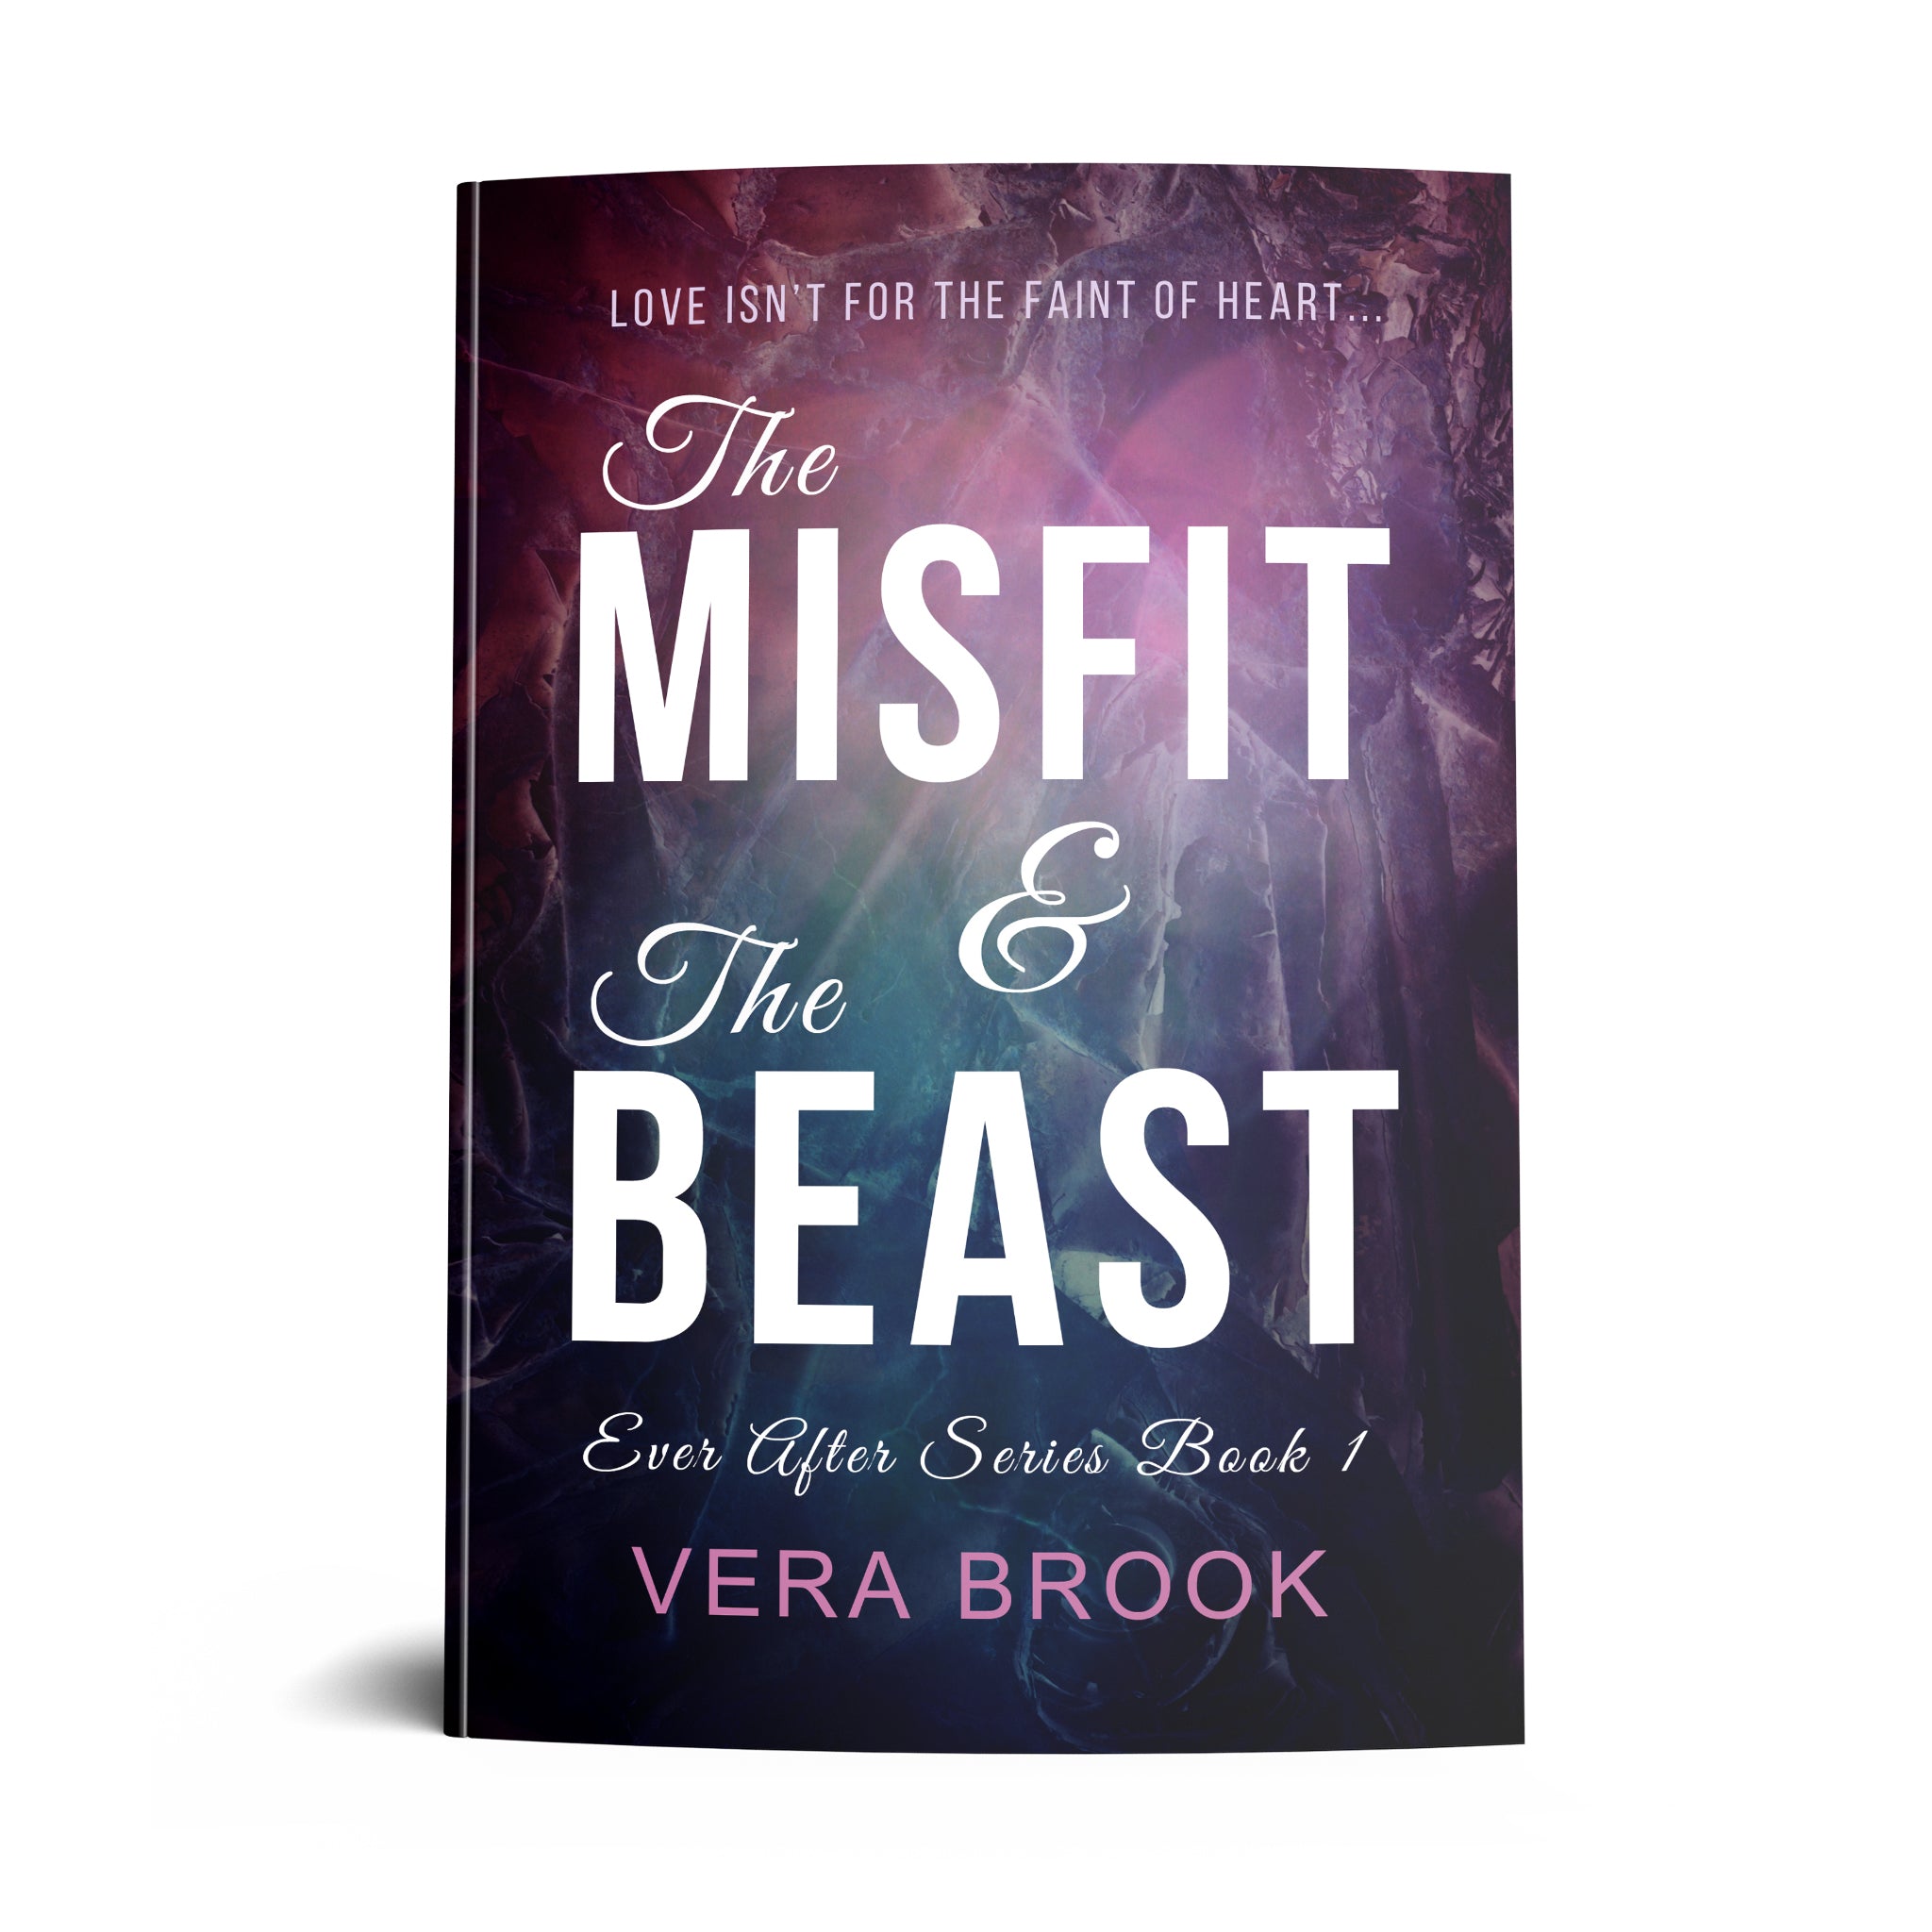 THE　THE　Ever　MISFIT　(SIGNED　Shop　Vera　BEAST　Book　Brook　paperback)　–　After　Series